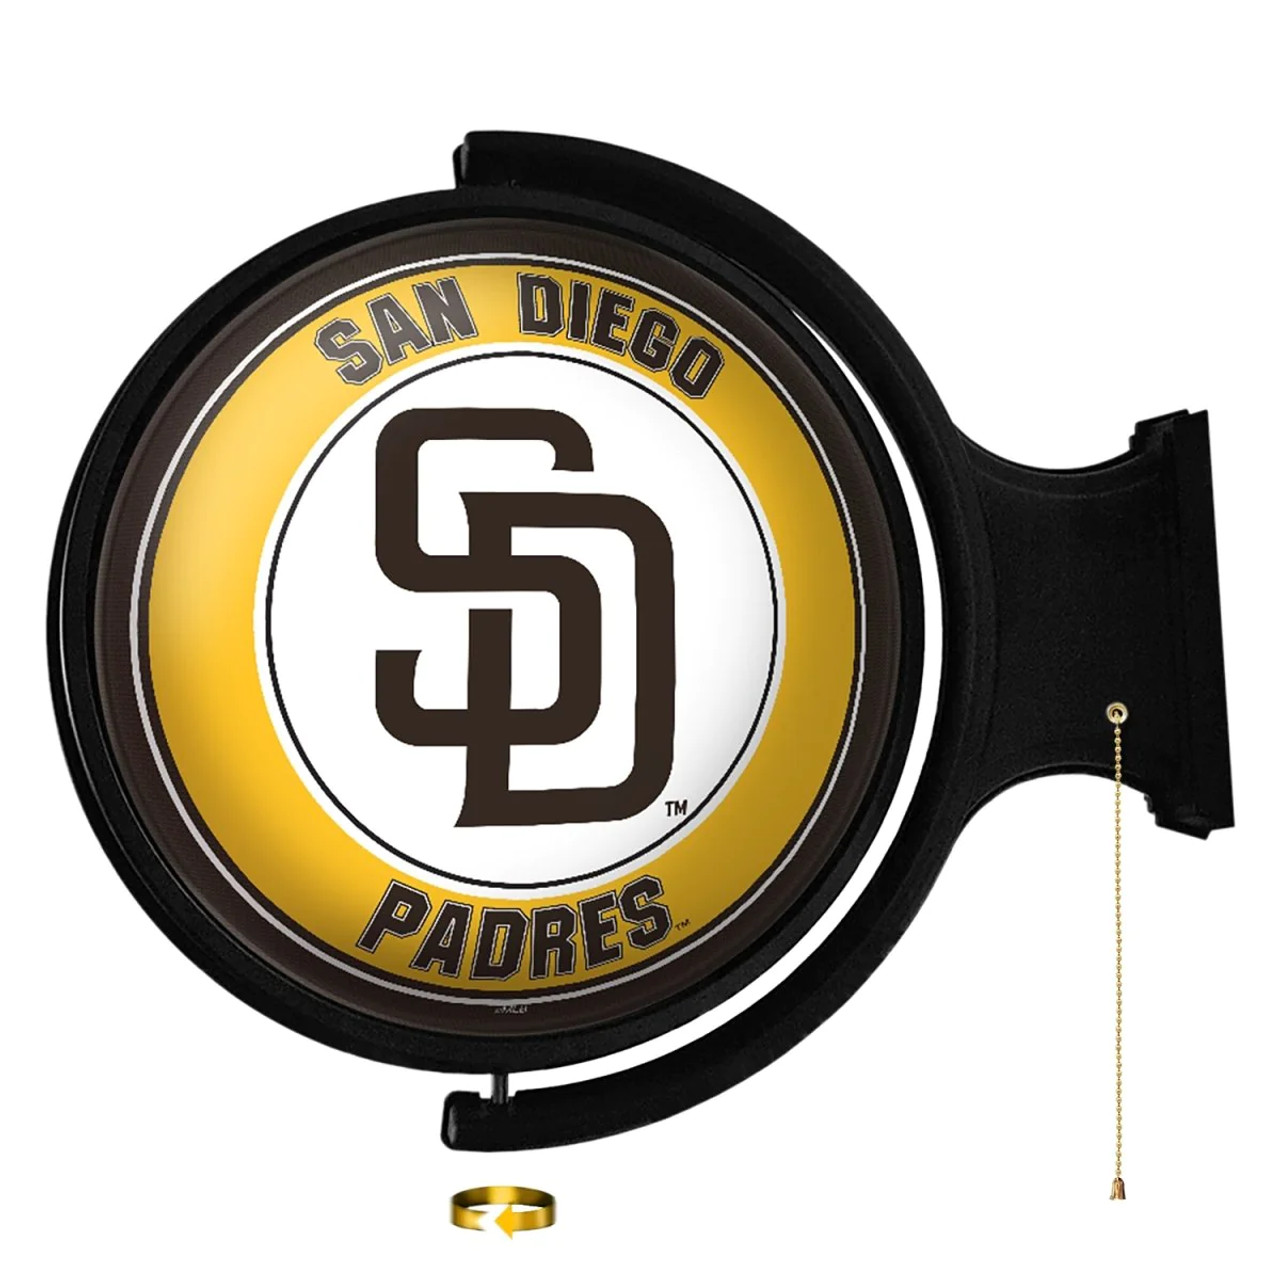 MBSDIE-115-01, San Diego, SD, SDP, Padres,  Original, Round, Rotating, Lighted, Wall, Sign, The Fan-Brand, 704384952572, LED